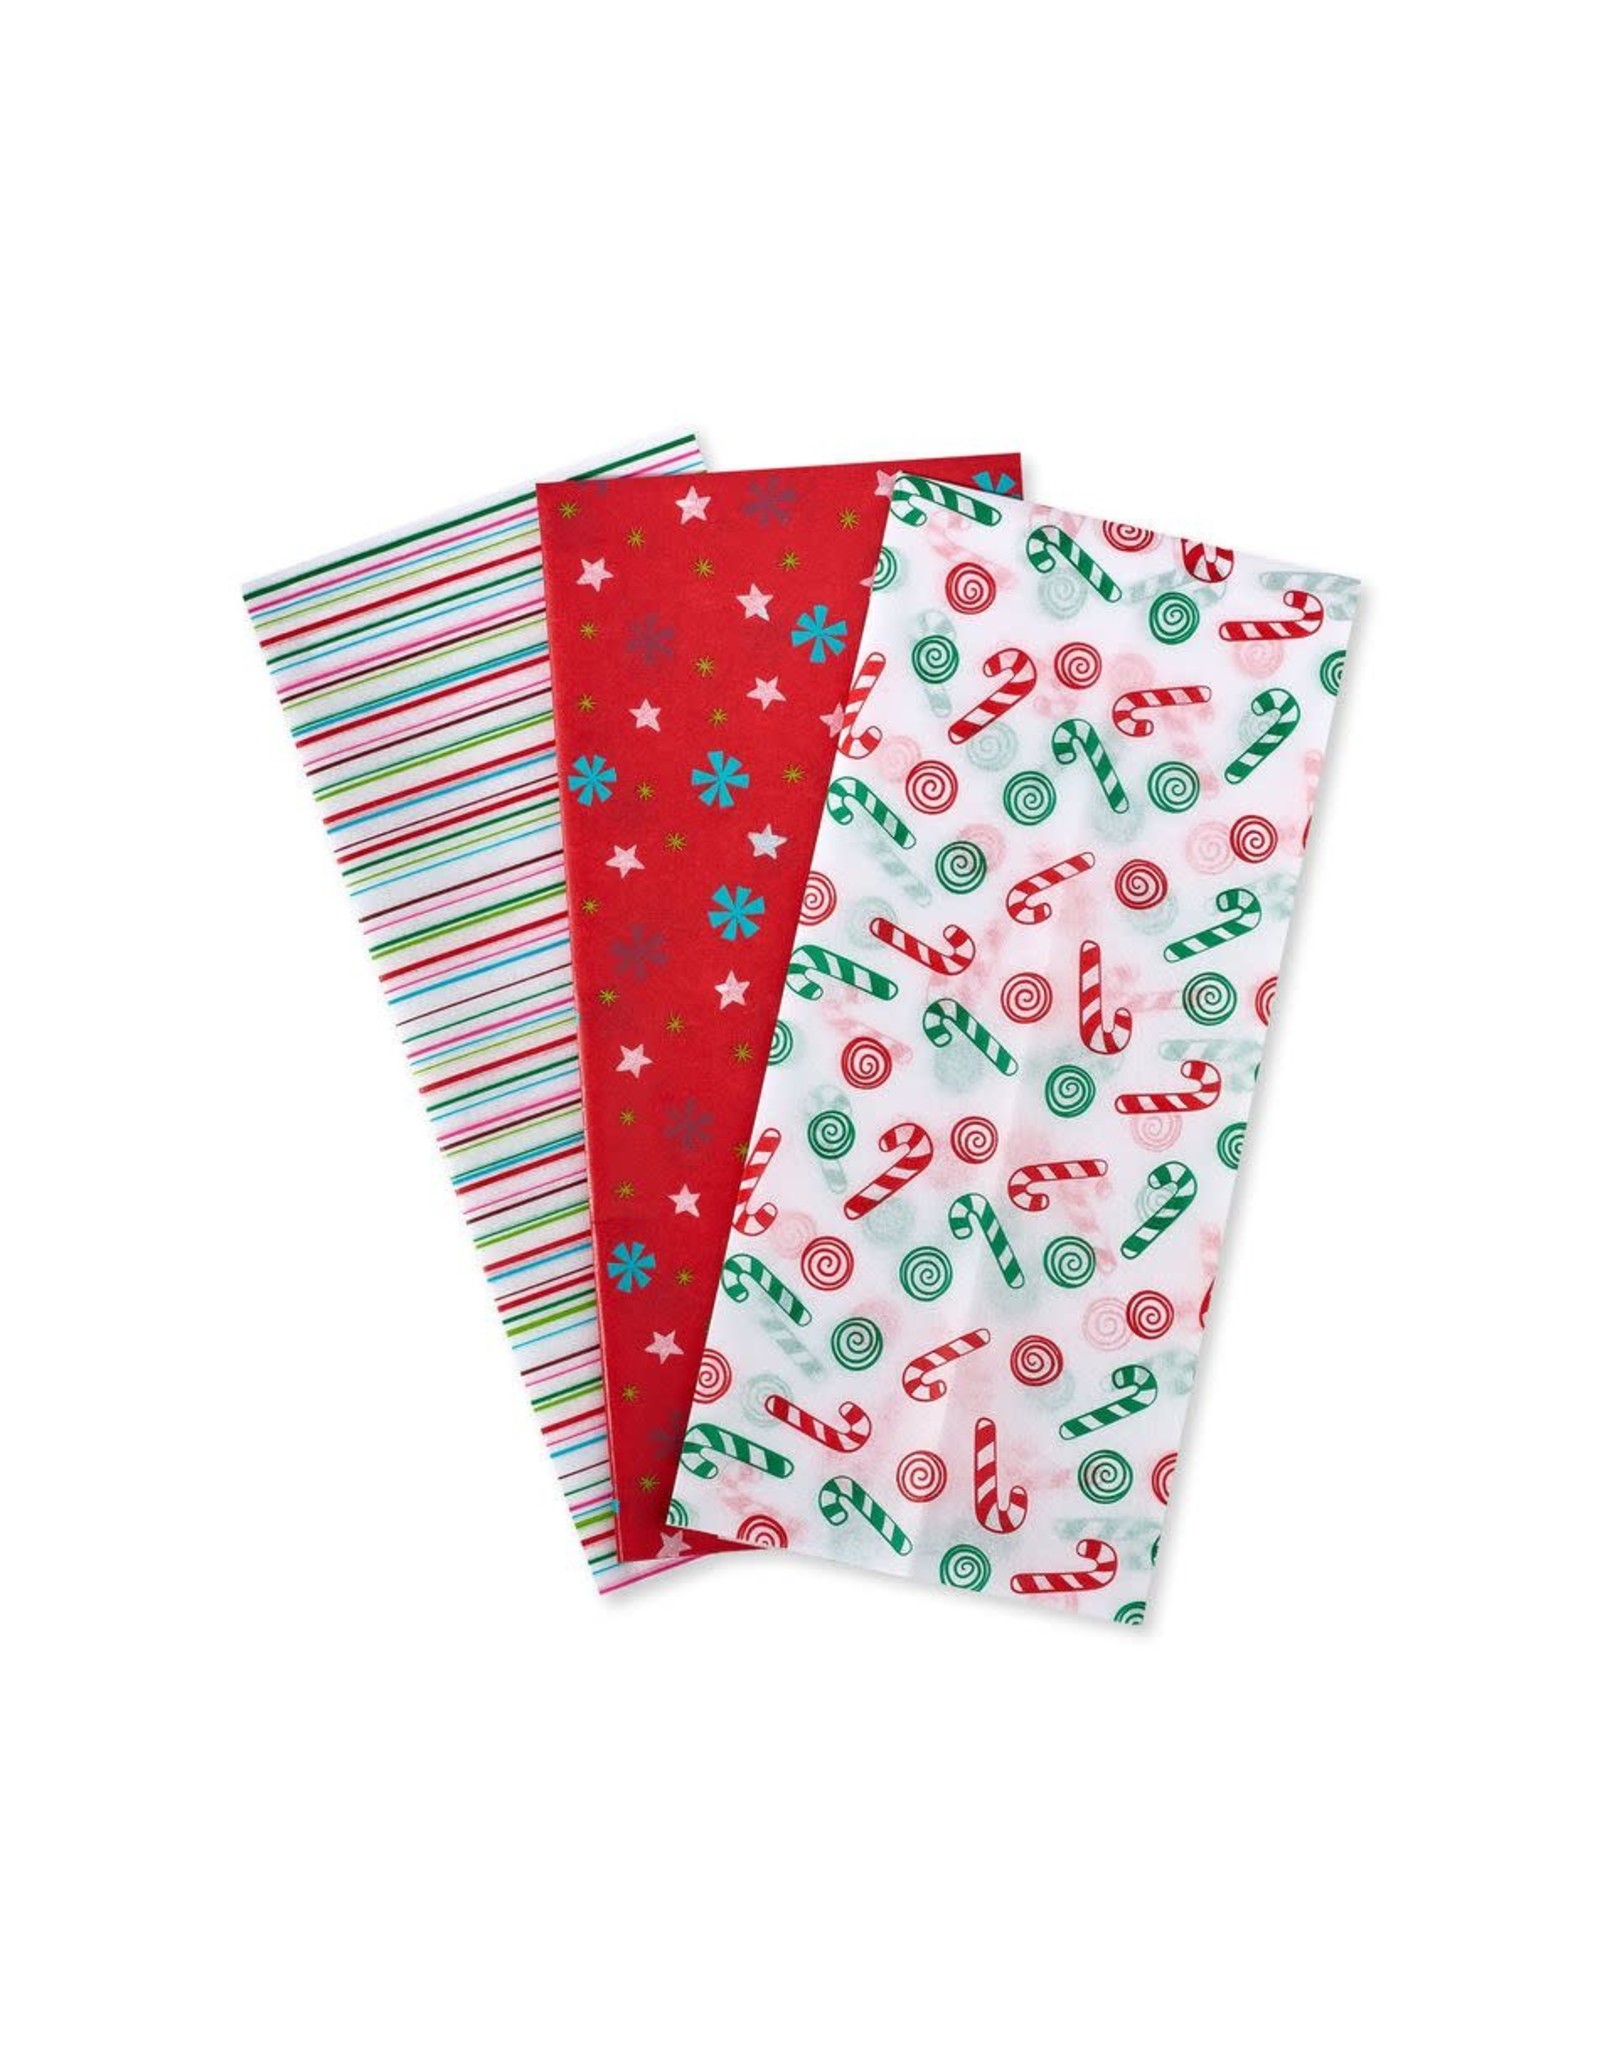 PAPYRUS® Christmas Tissue Paper 9 Sheets Gingerbread Wonderland